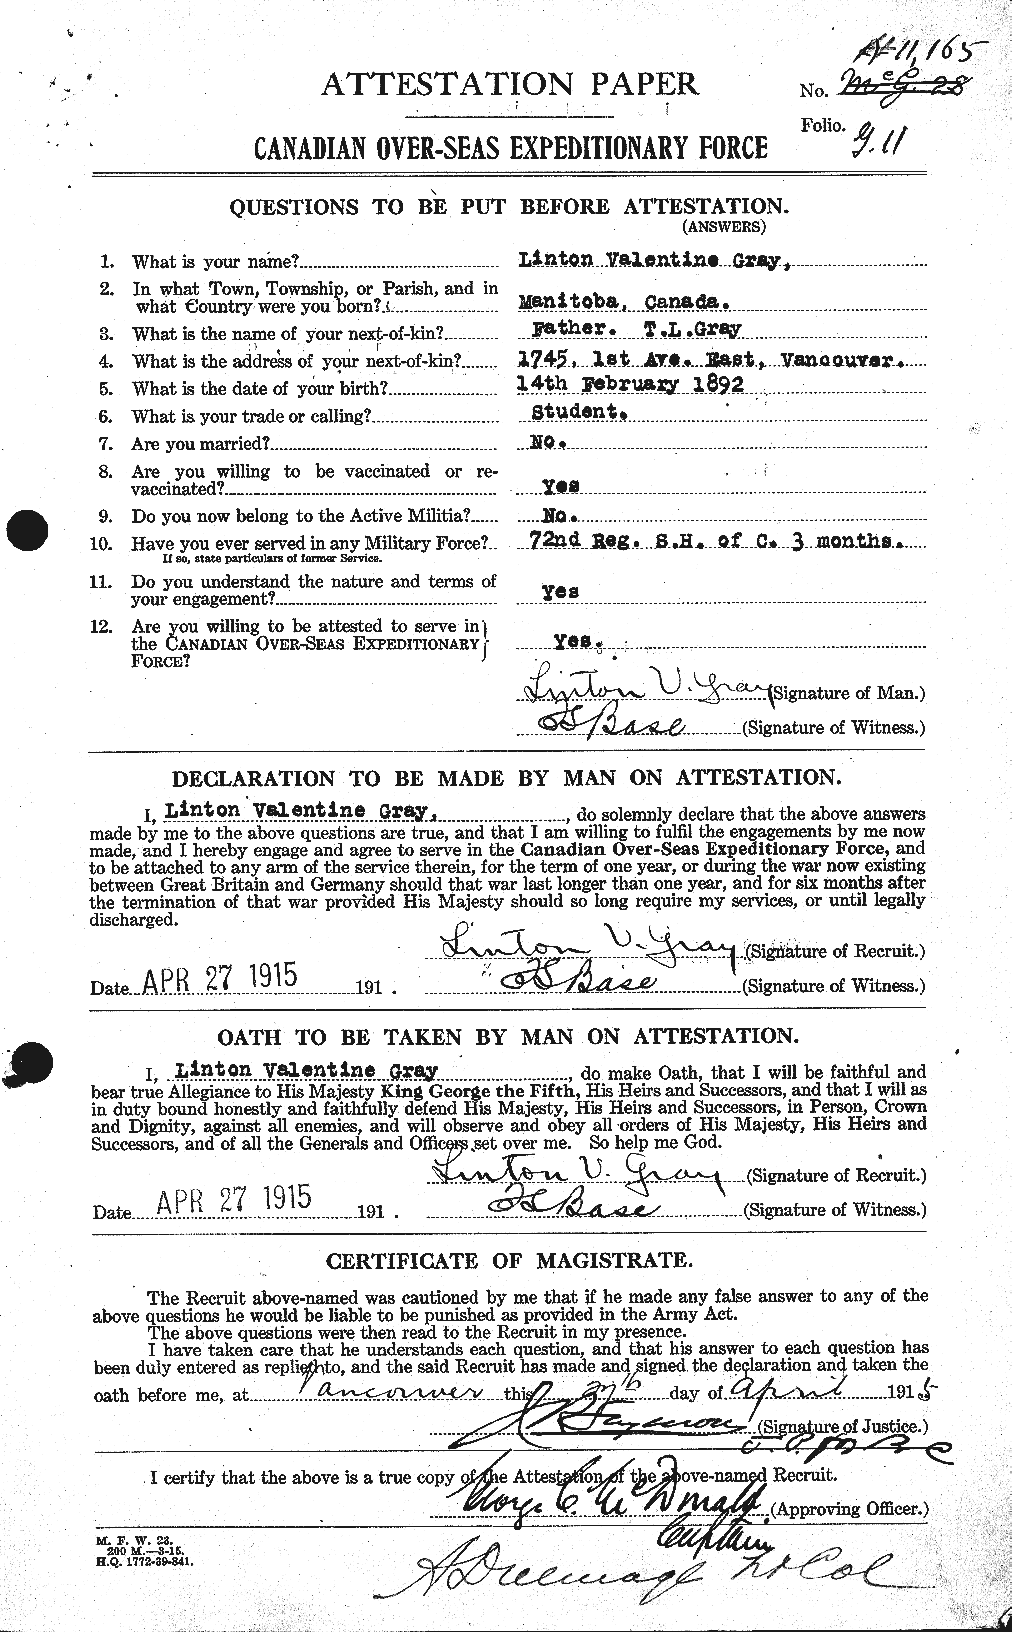 Personnel Records of the First World War - CEF 363441a